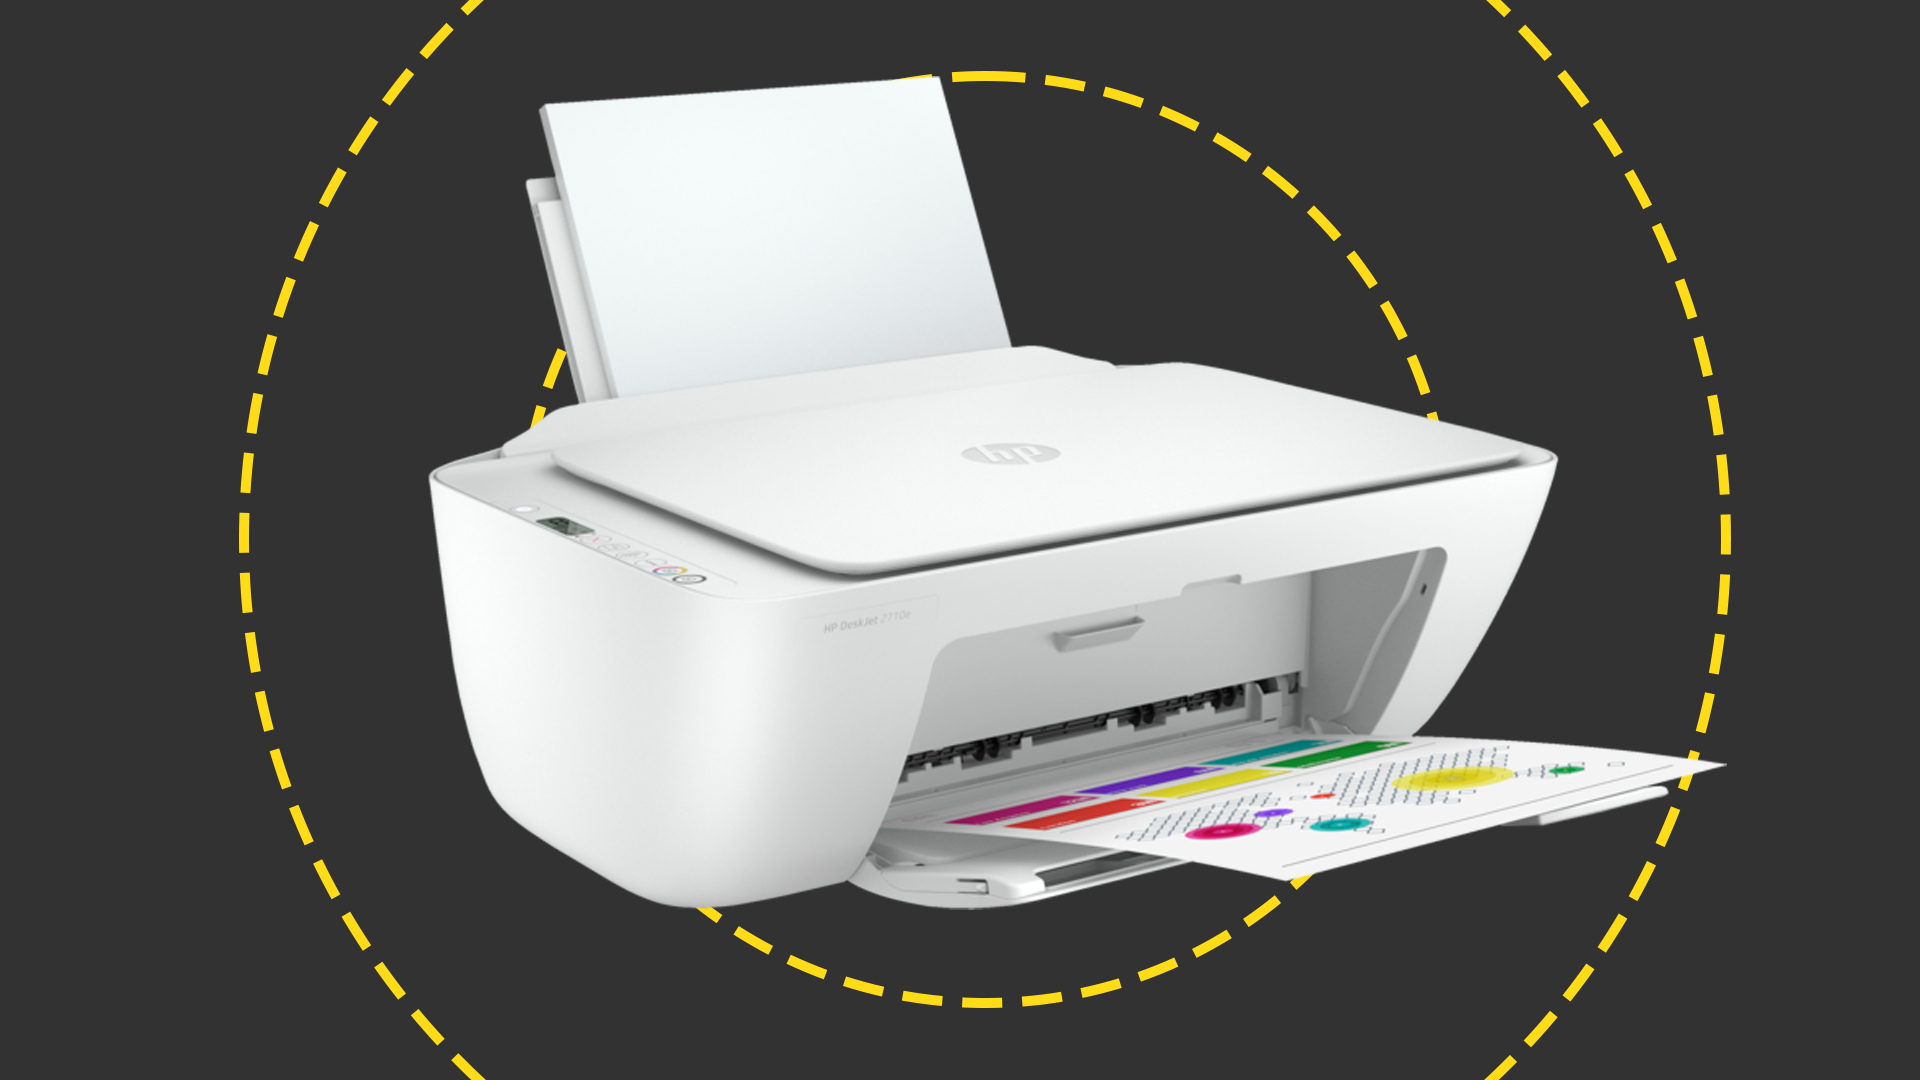 Forbedring Andet Brokke sig HP Deskjet 2710e review: A cheap compact printer that won't exceed your  expectations | ITPro